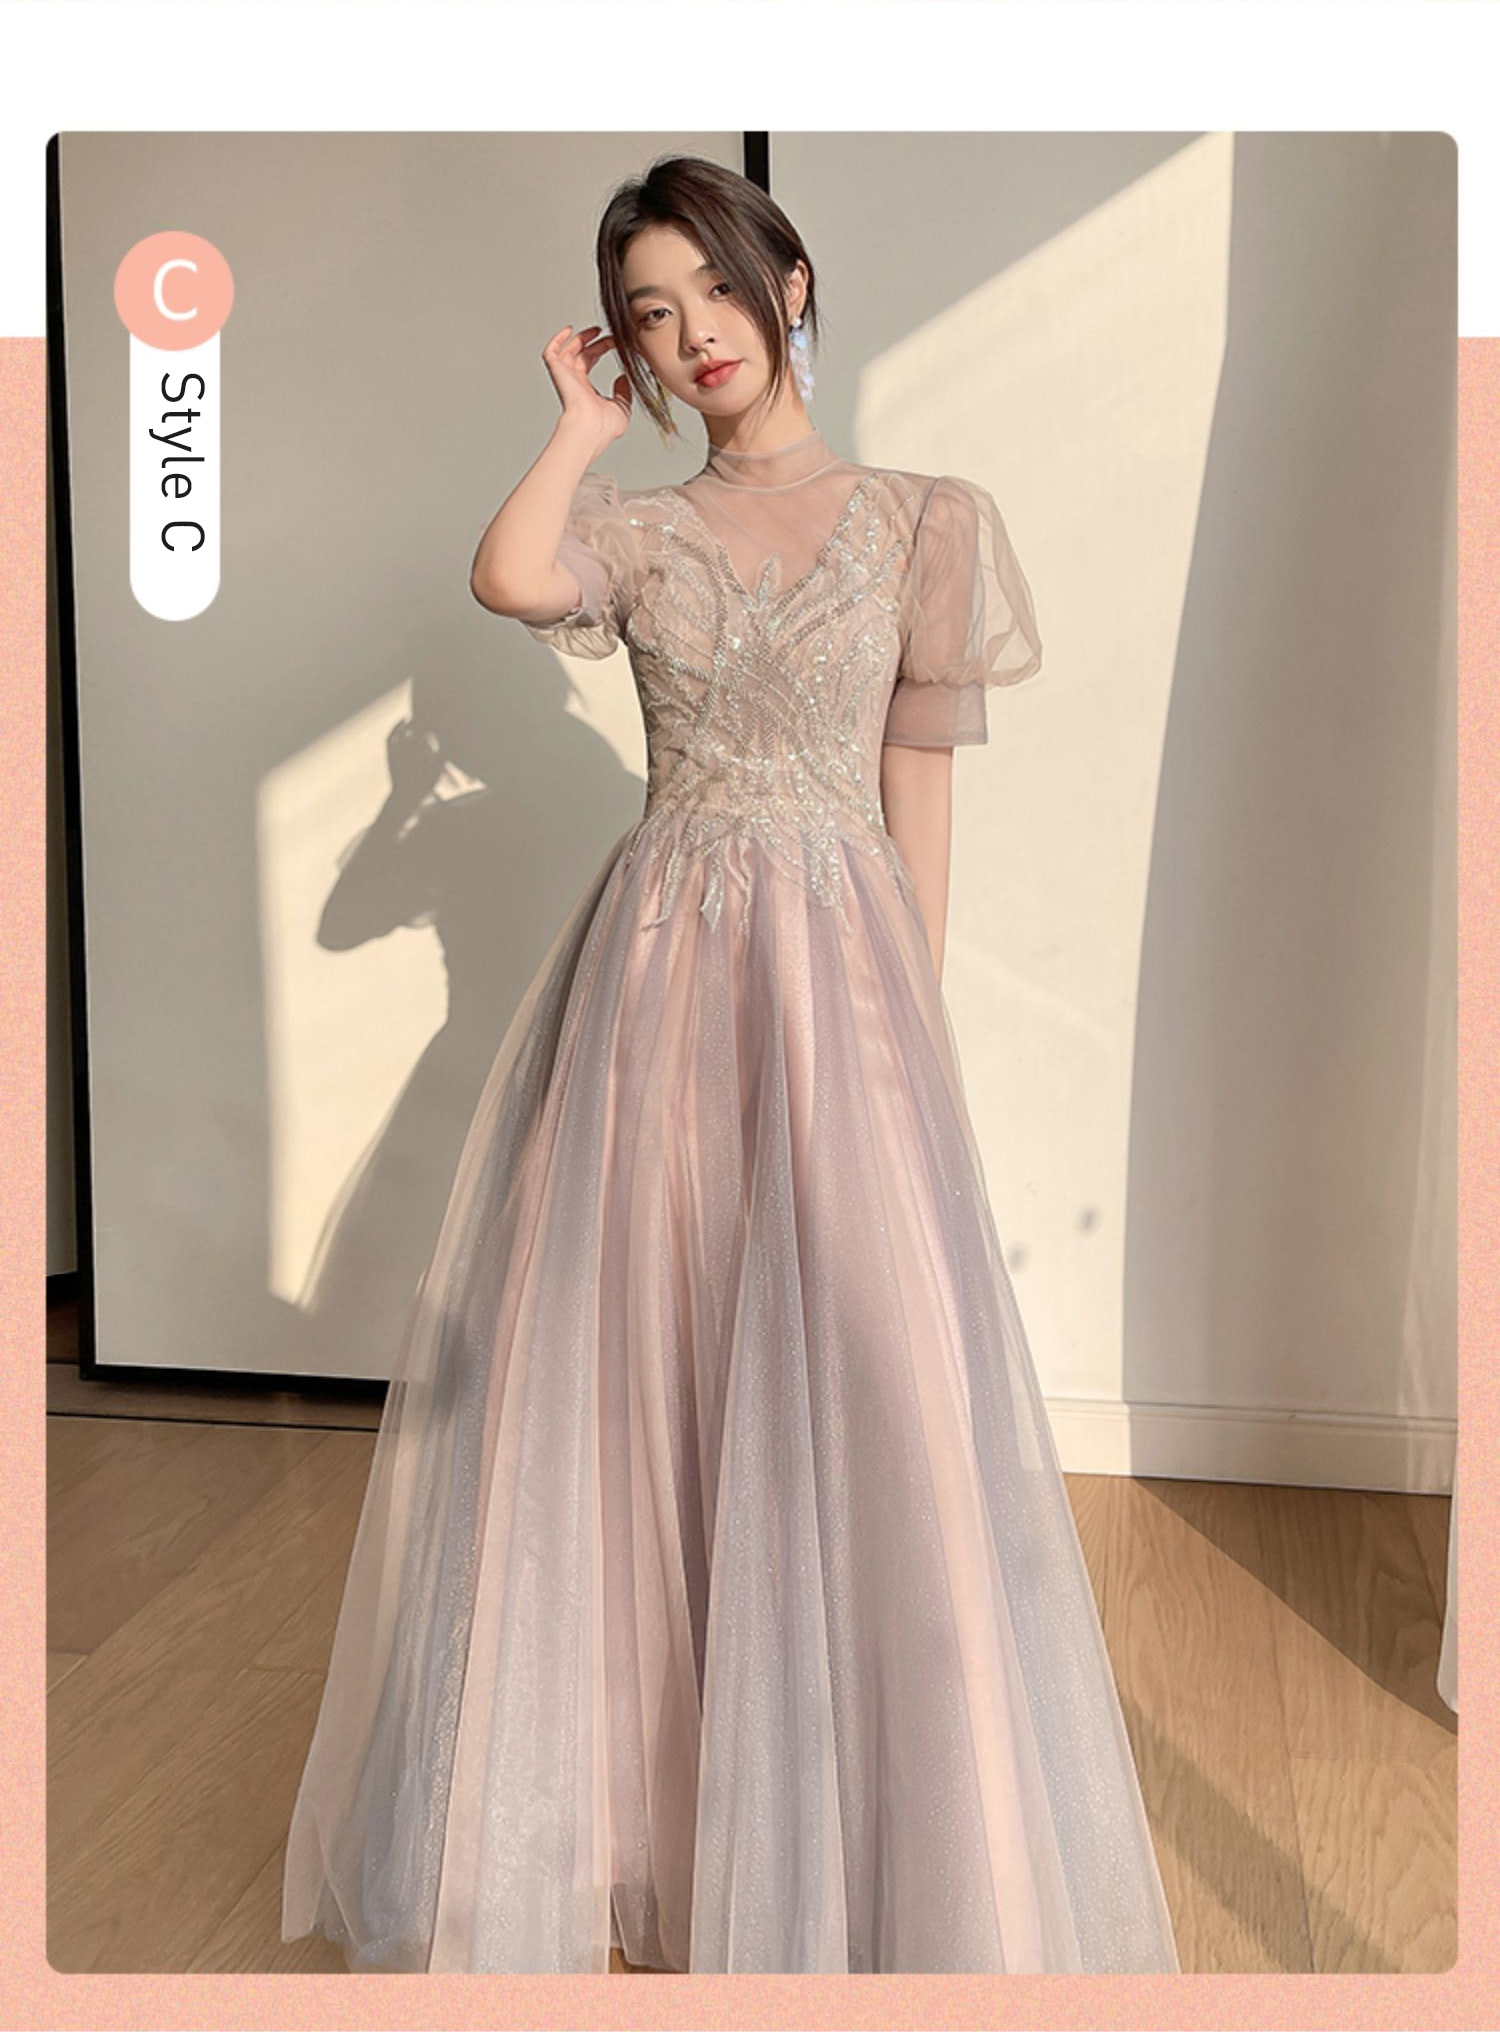 Elegant-Pale-Pink-Maxi-Bridesmaid-Dress-Long-Party-Ball-Gown20